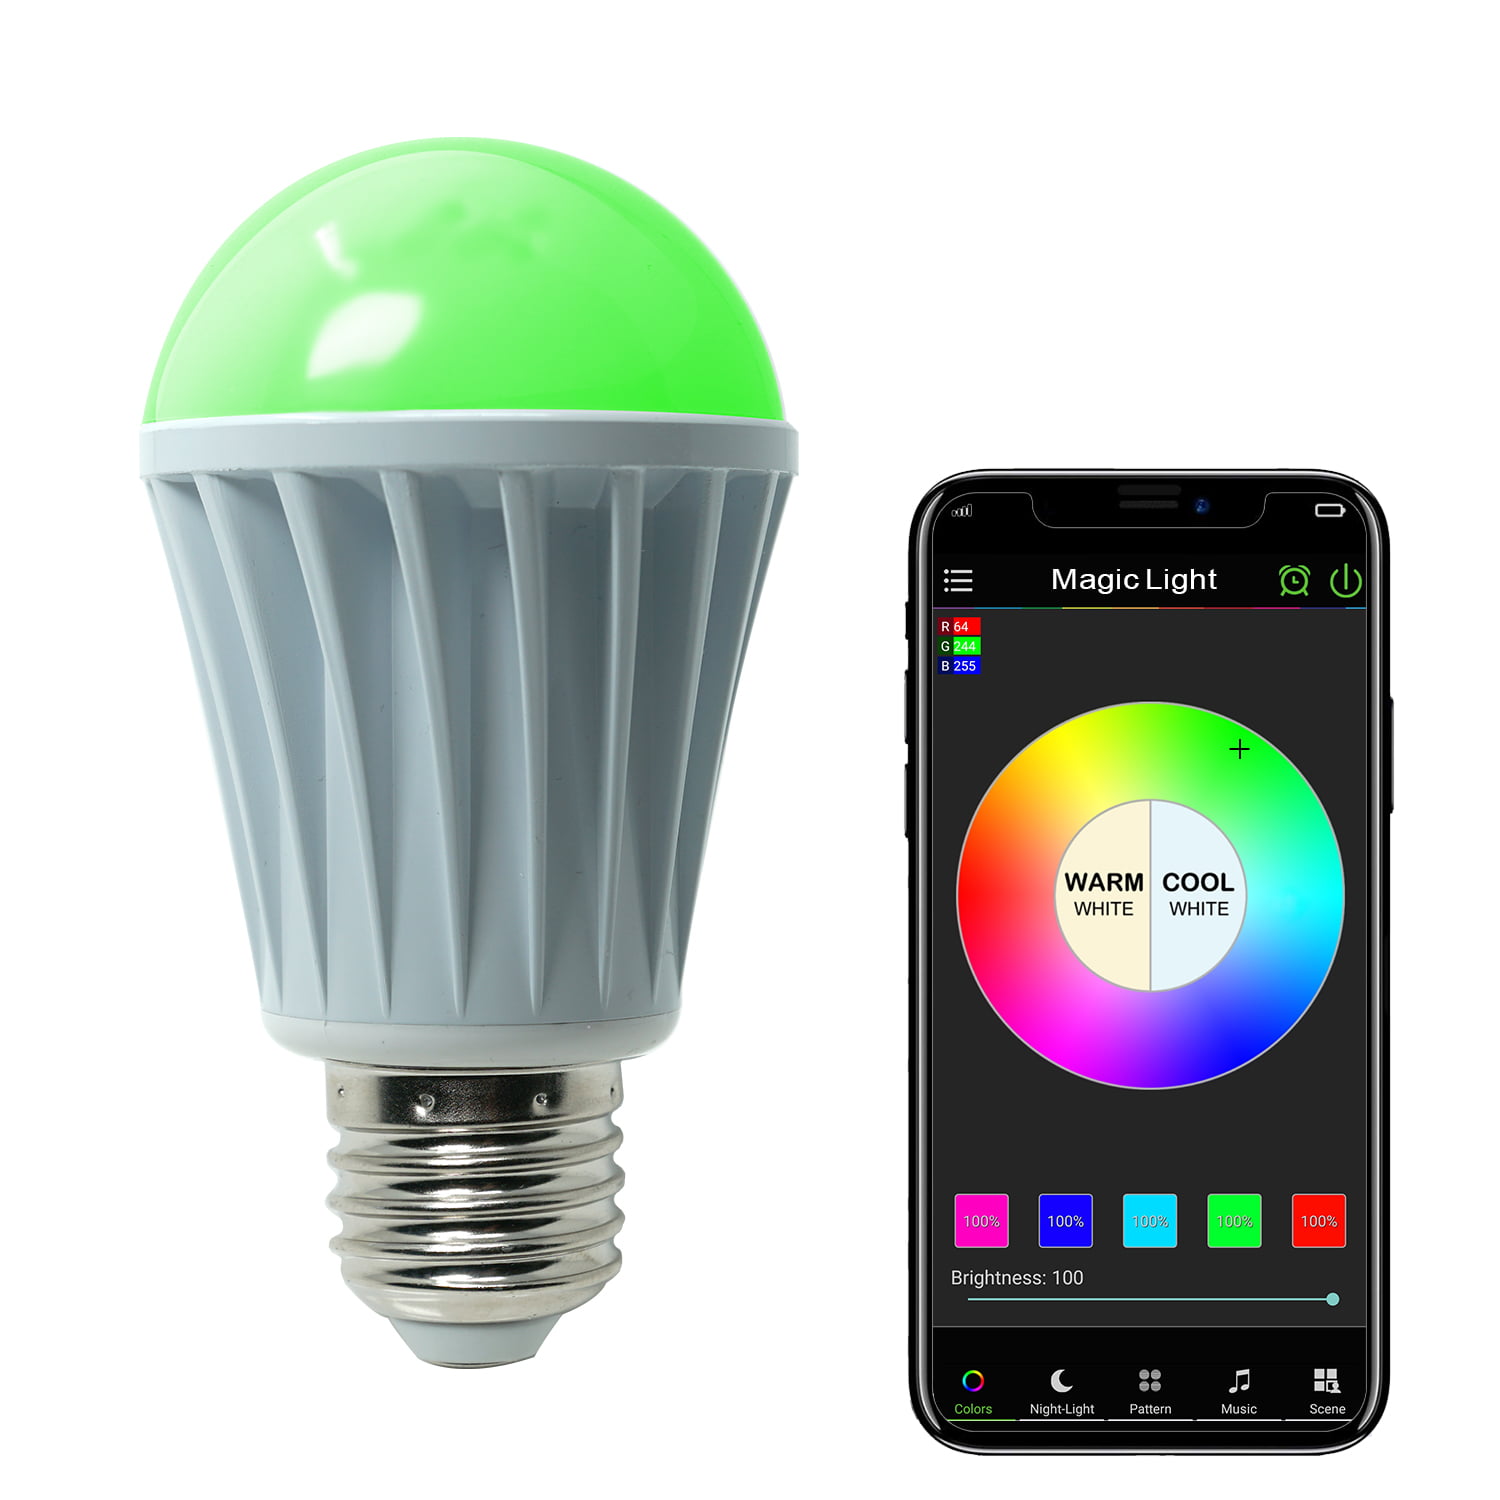 MagicLight WiFi Controlled LED Sunrise Wake Up Lights - 60w Equivalent Multicolored Full Spectrum Bulb - Compatible with Alexa & Google Home Assistant Walmart.com